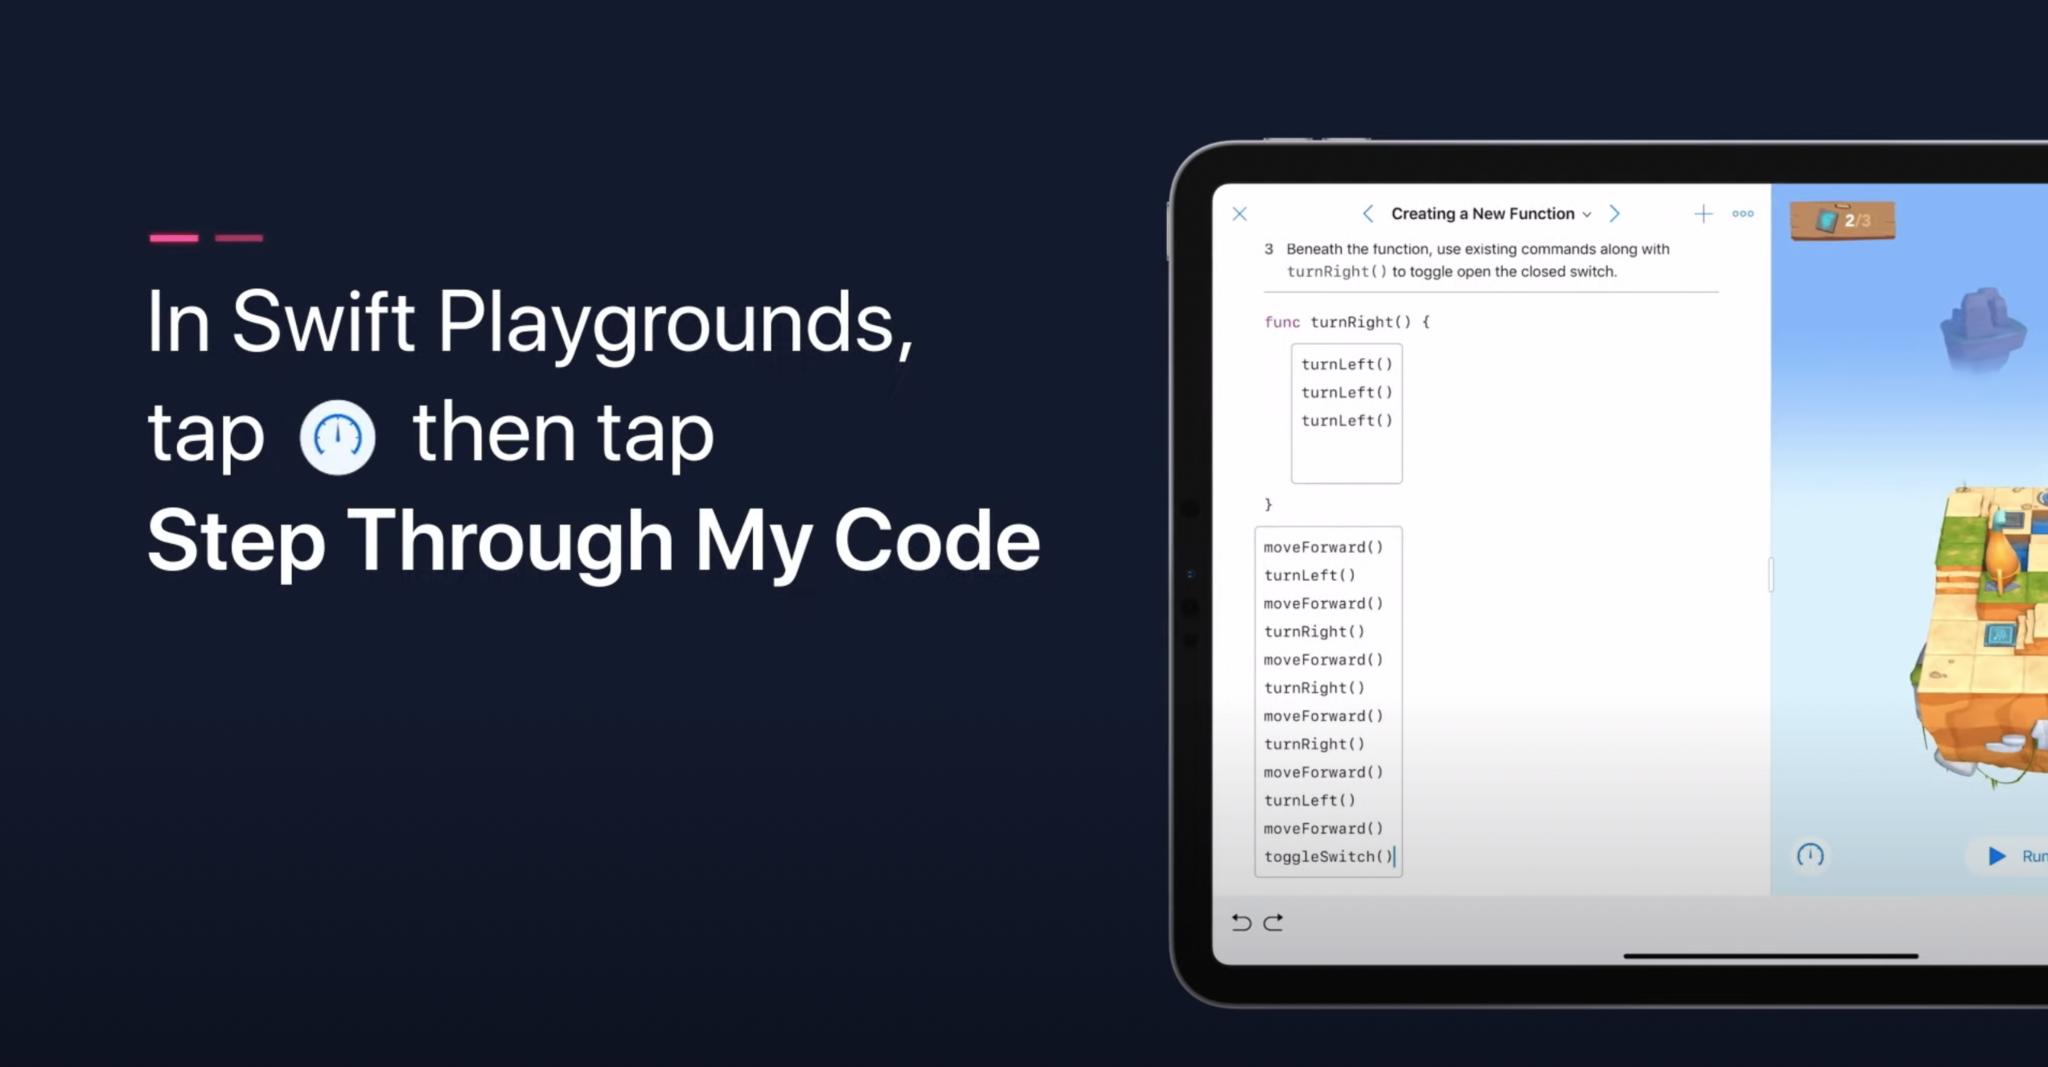 Screenshot from an Apple Support video showing how to activate the "Step Through My Code" option in Swift Playgrounds.